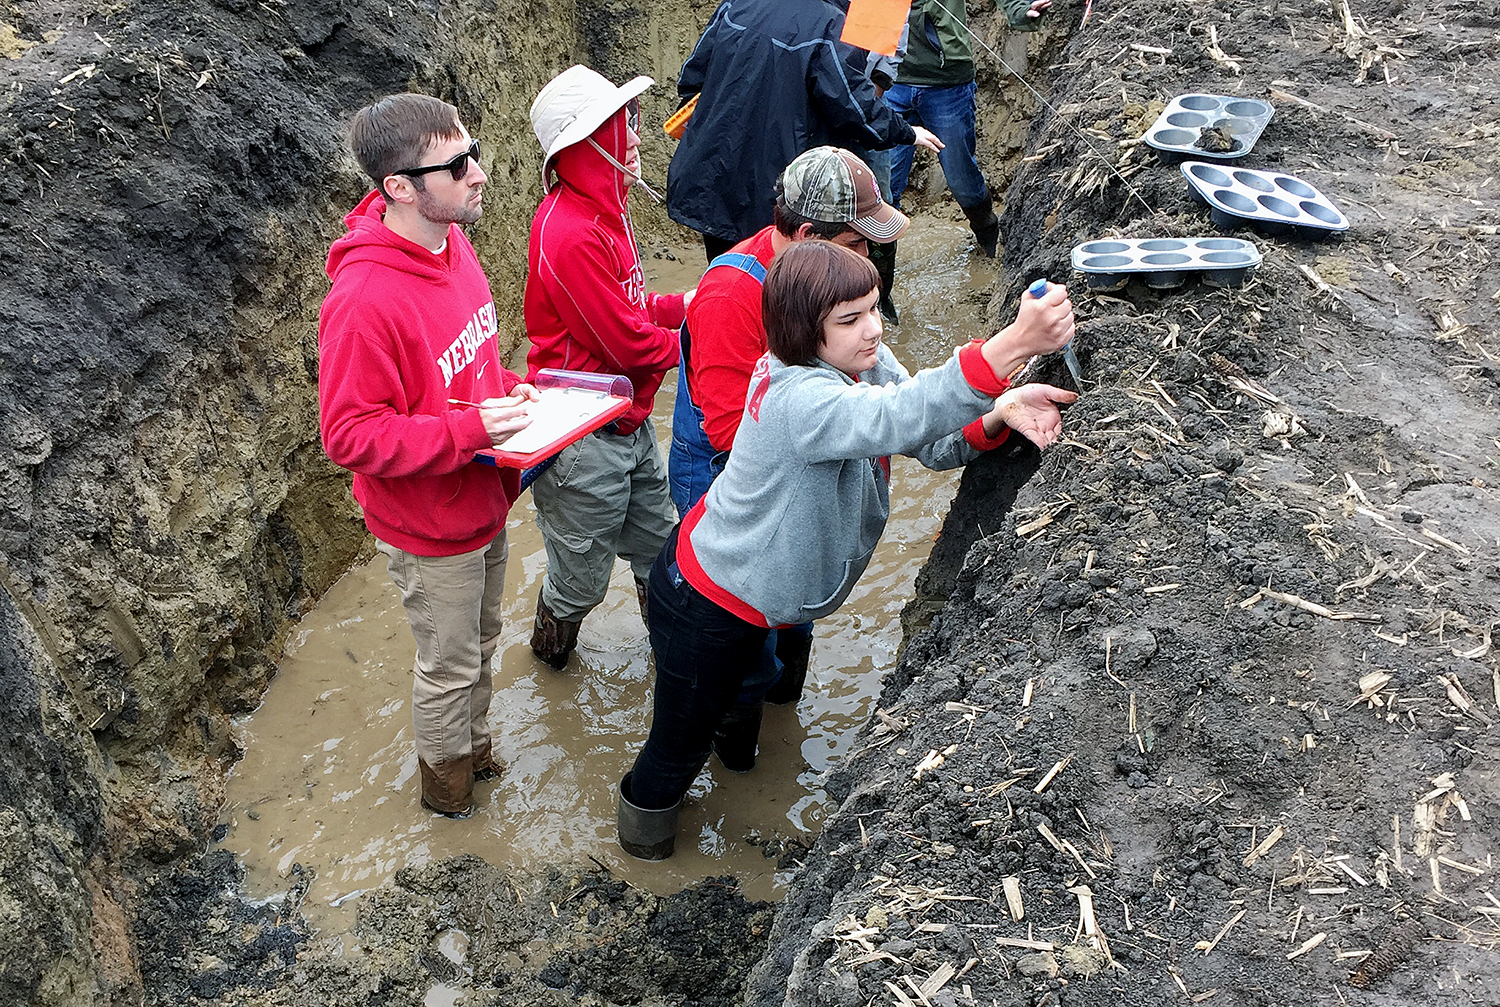 The Soil Judging Team from University of Nebraska-Lincoln competes at nationals April 23 to 28, 2017, in DeKalb, Illinois. | Photo courtesy Rebecca Young